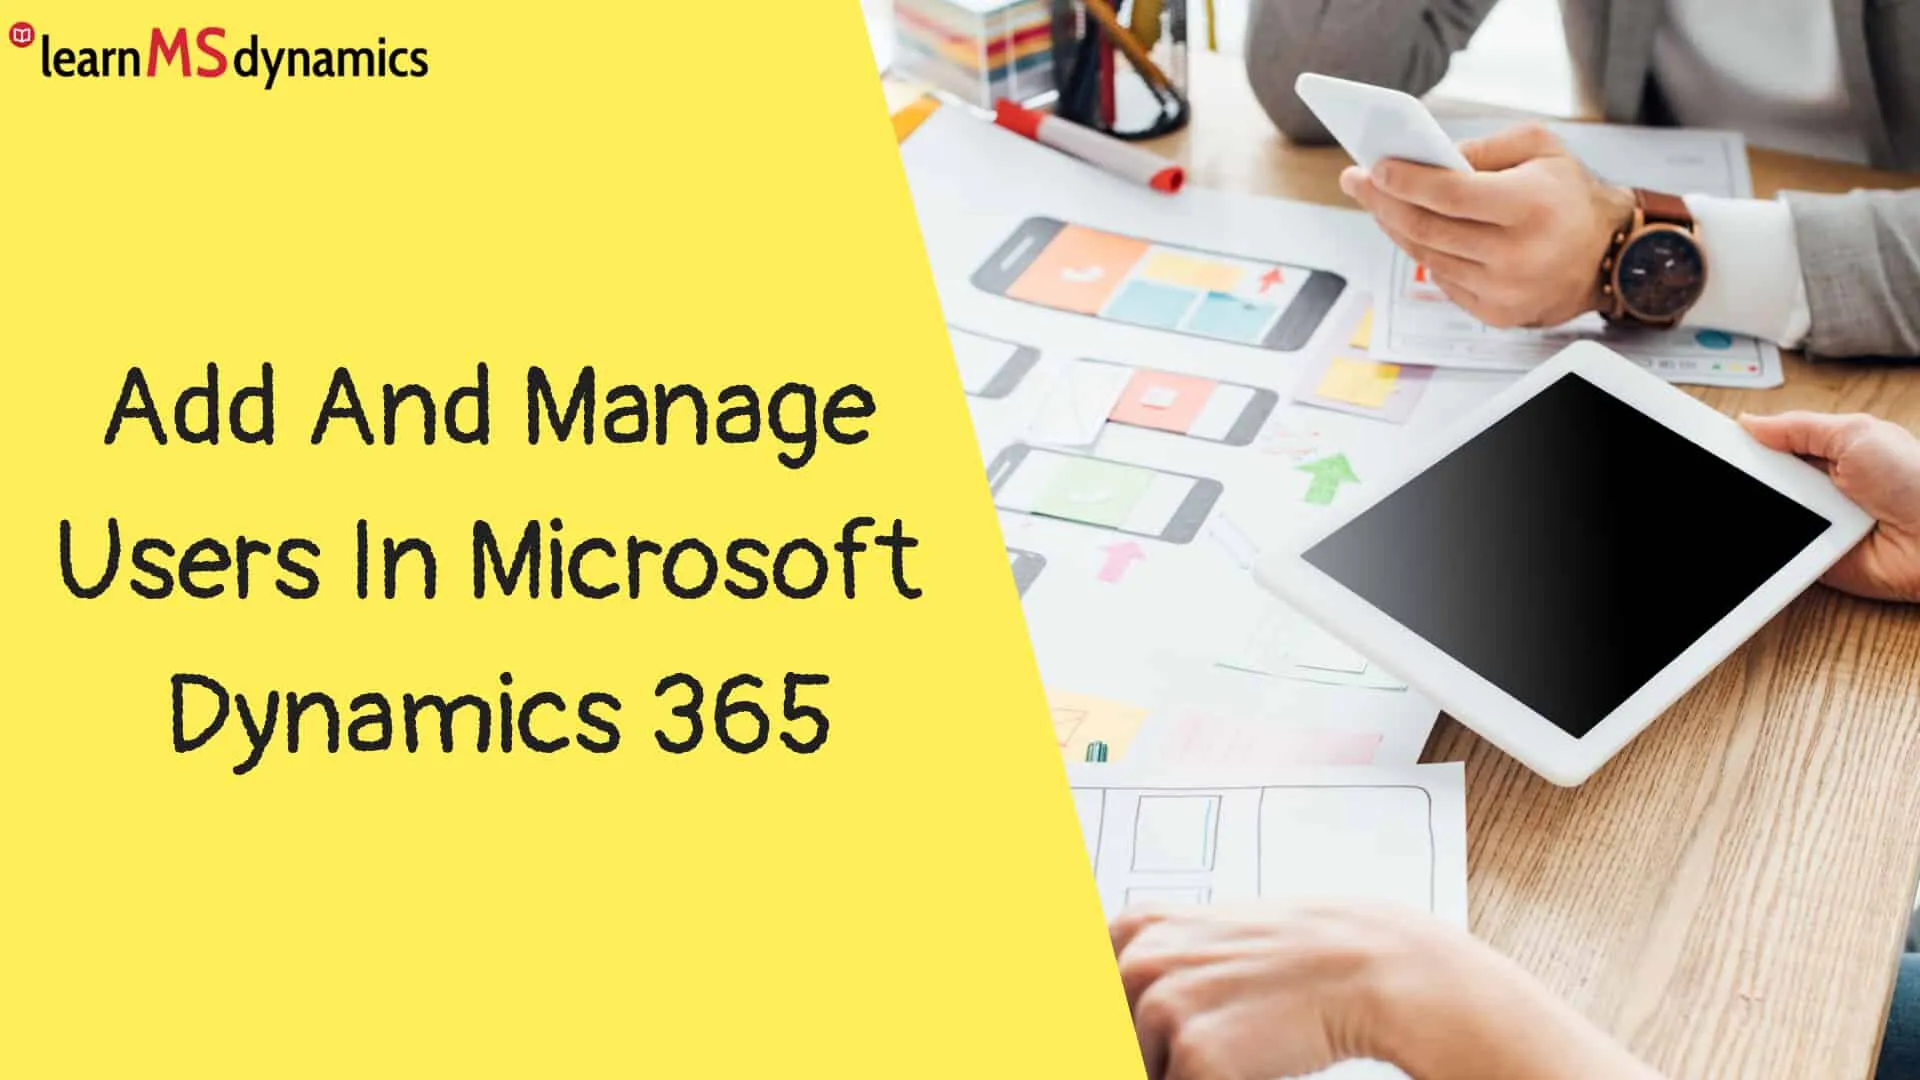 Add And Manage Users In Microsoft Dynamics 365